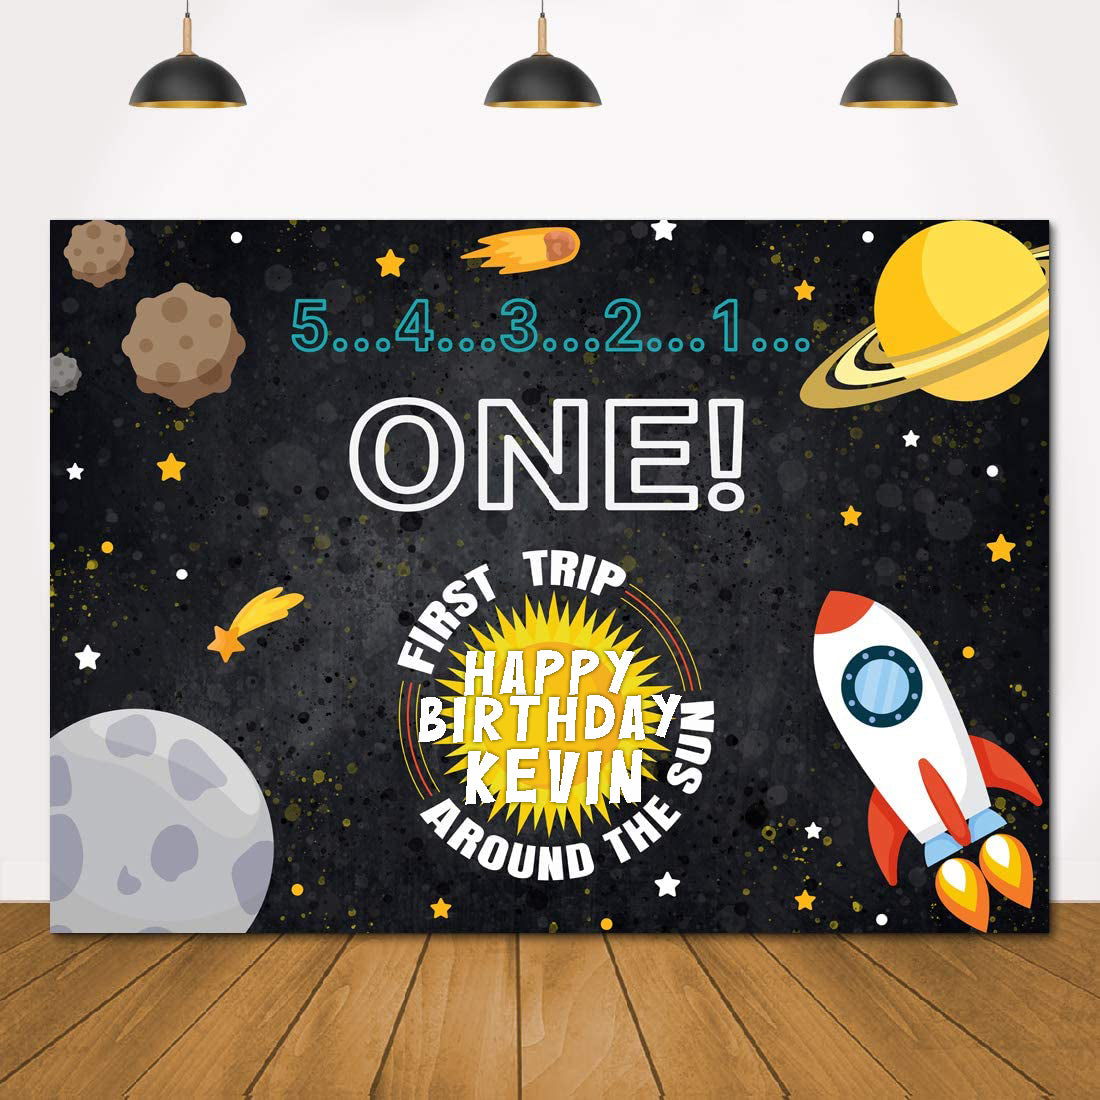 Buy Space Party Decoration Backdrop | Party Supplies | Thememyparty ...